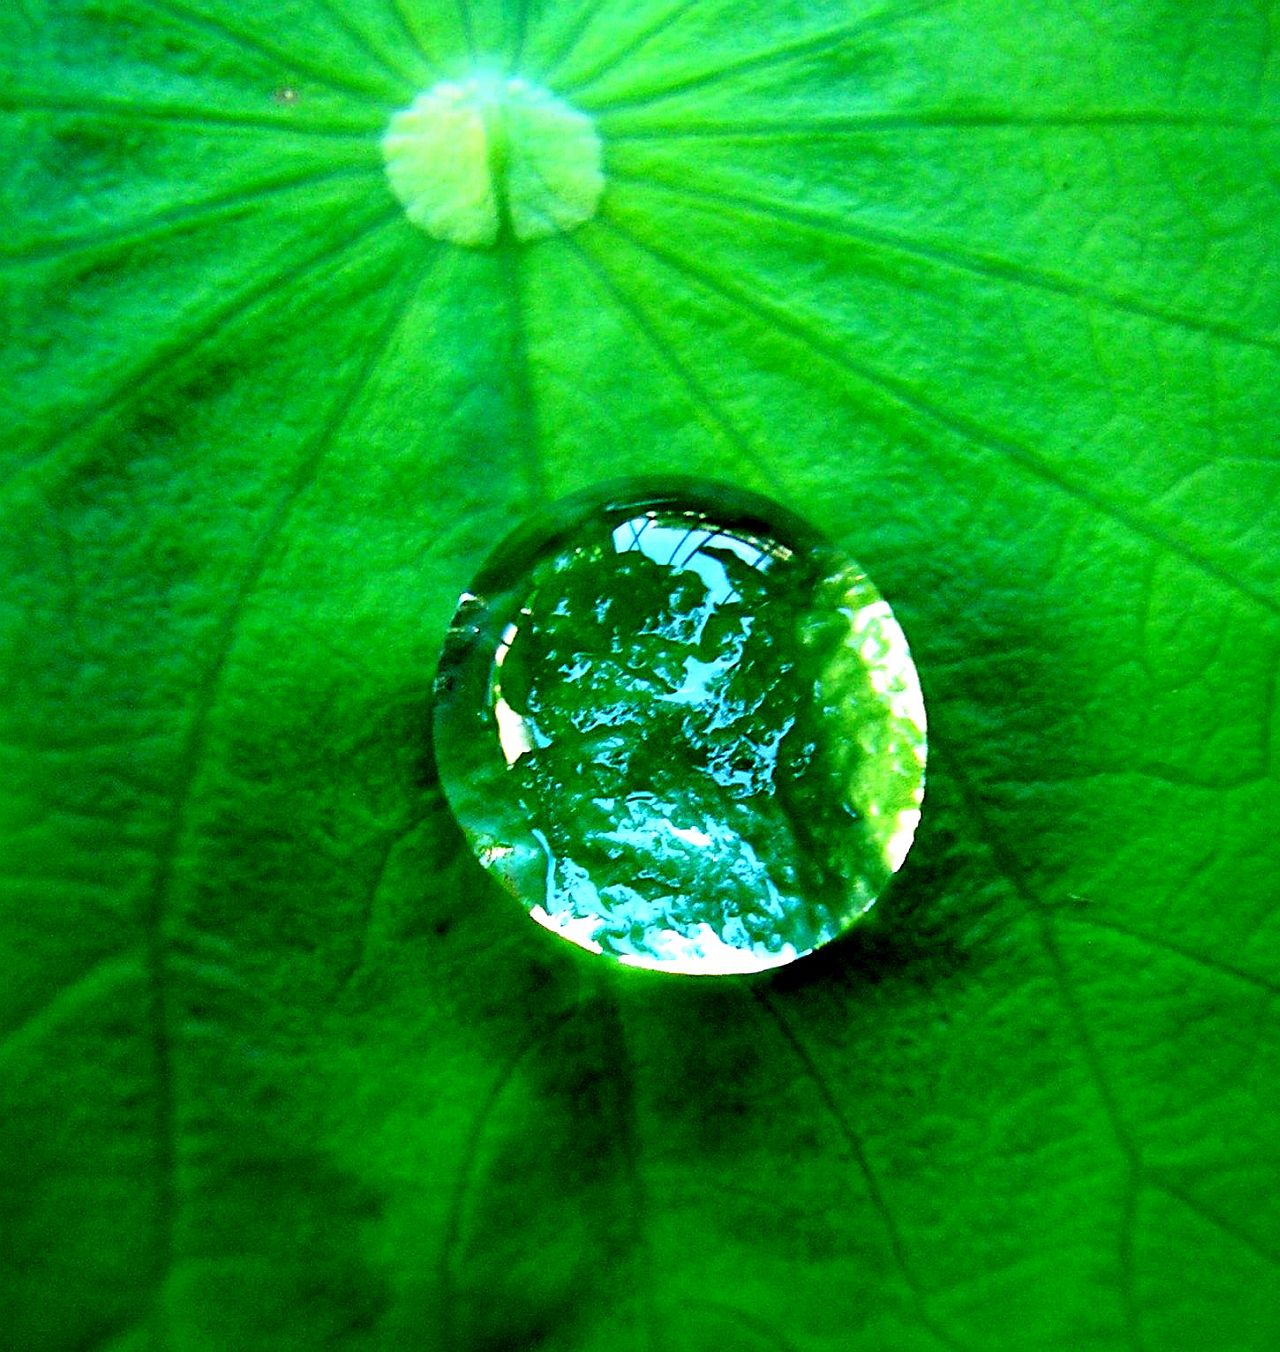 File:Water drop on a leaf - Wikimedia Commons